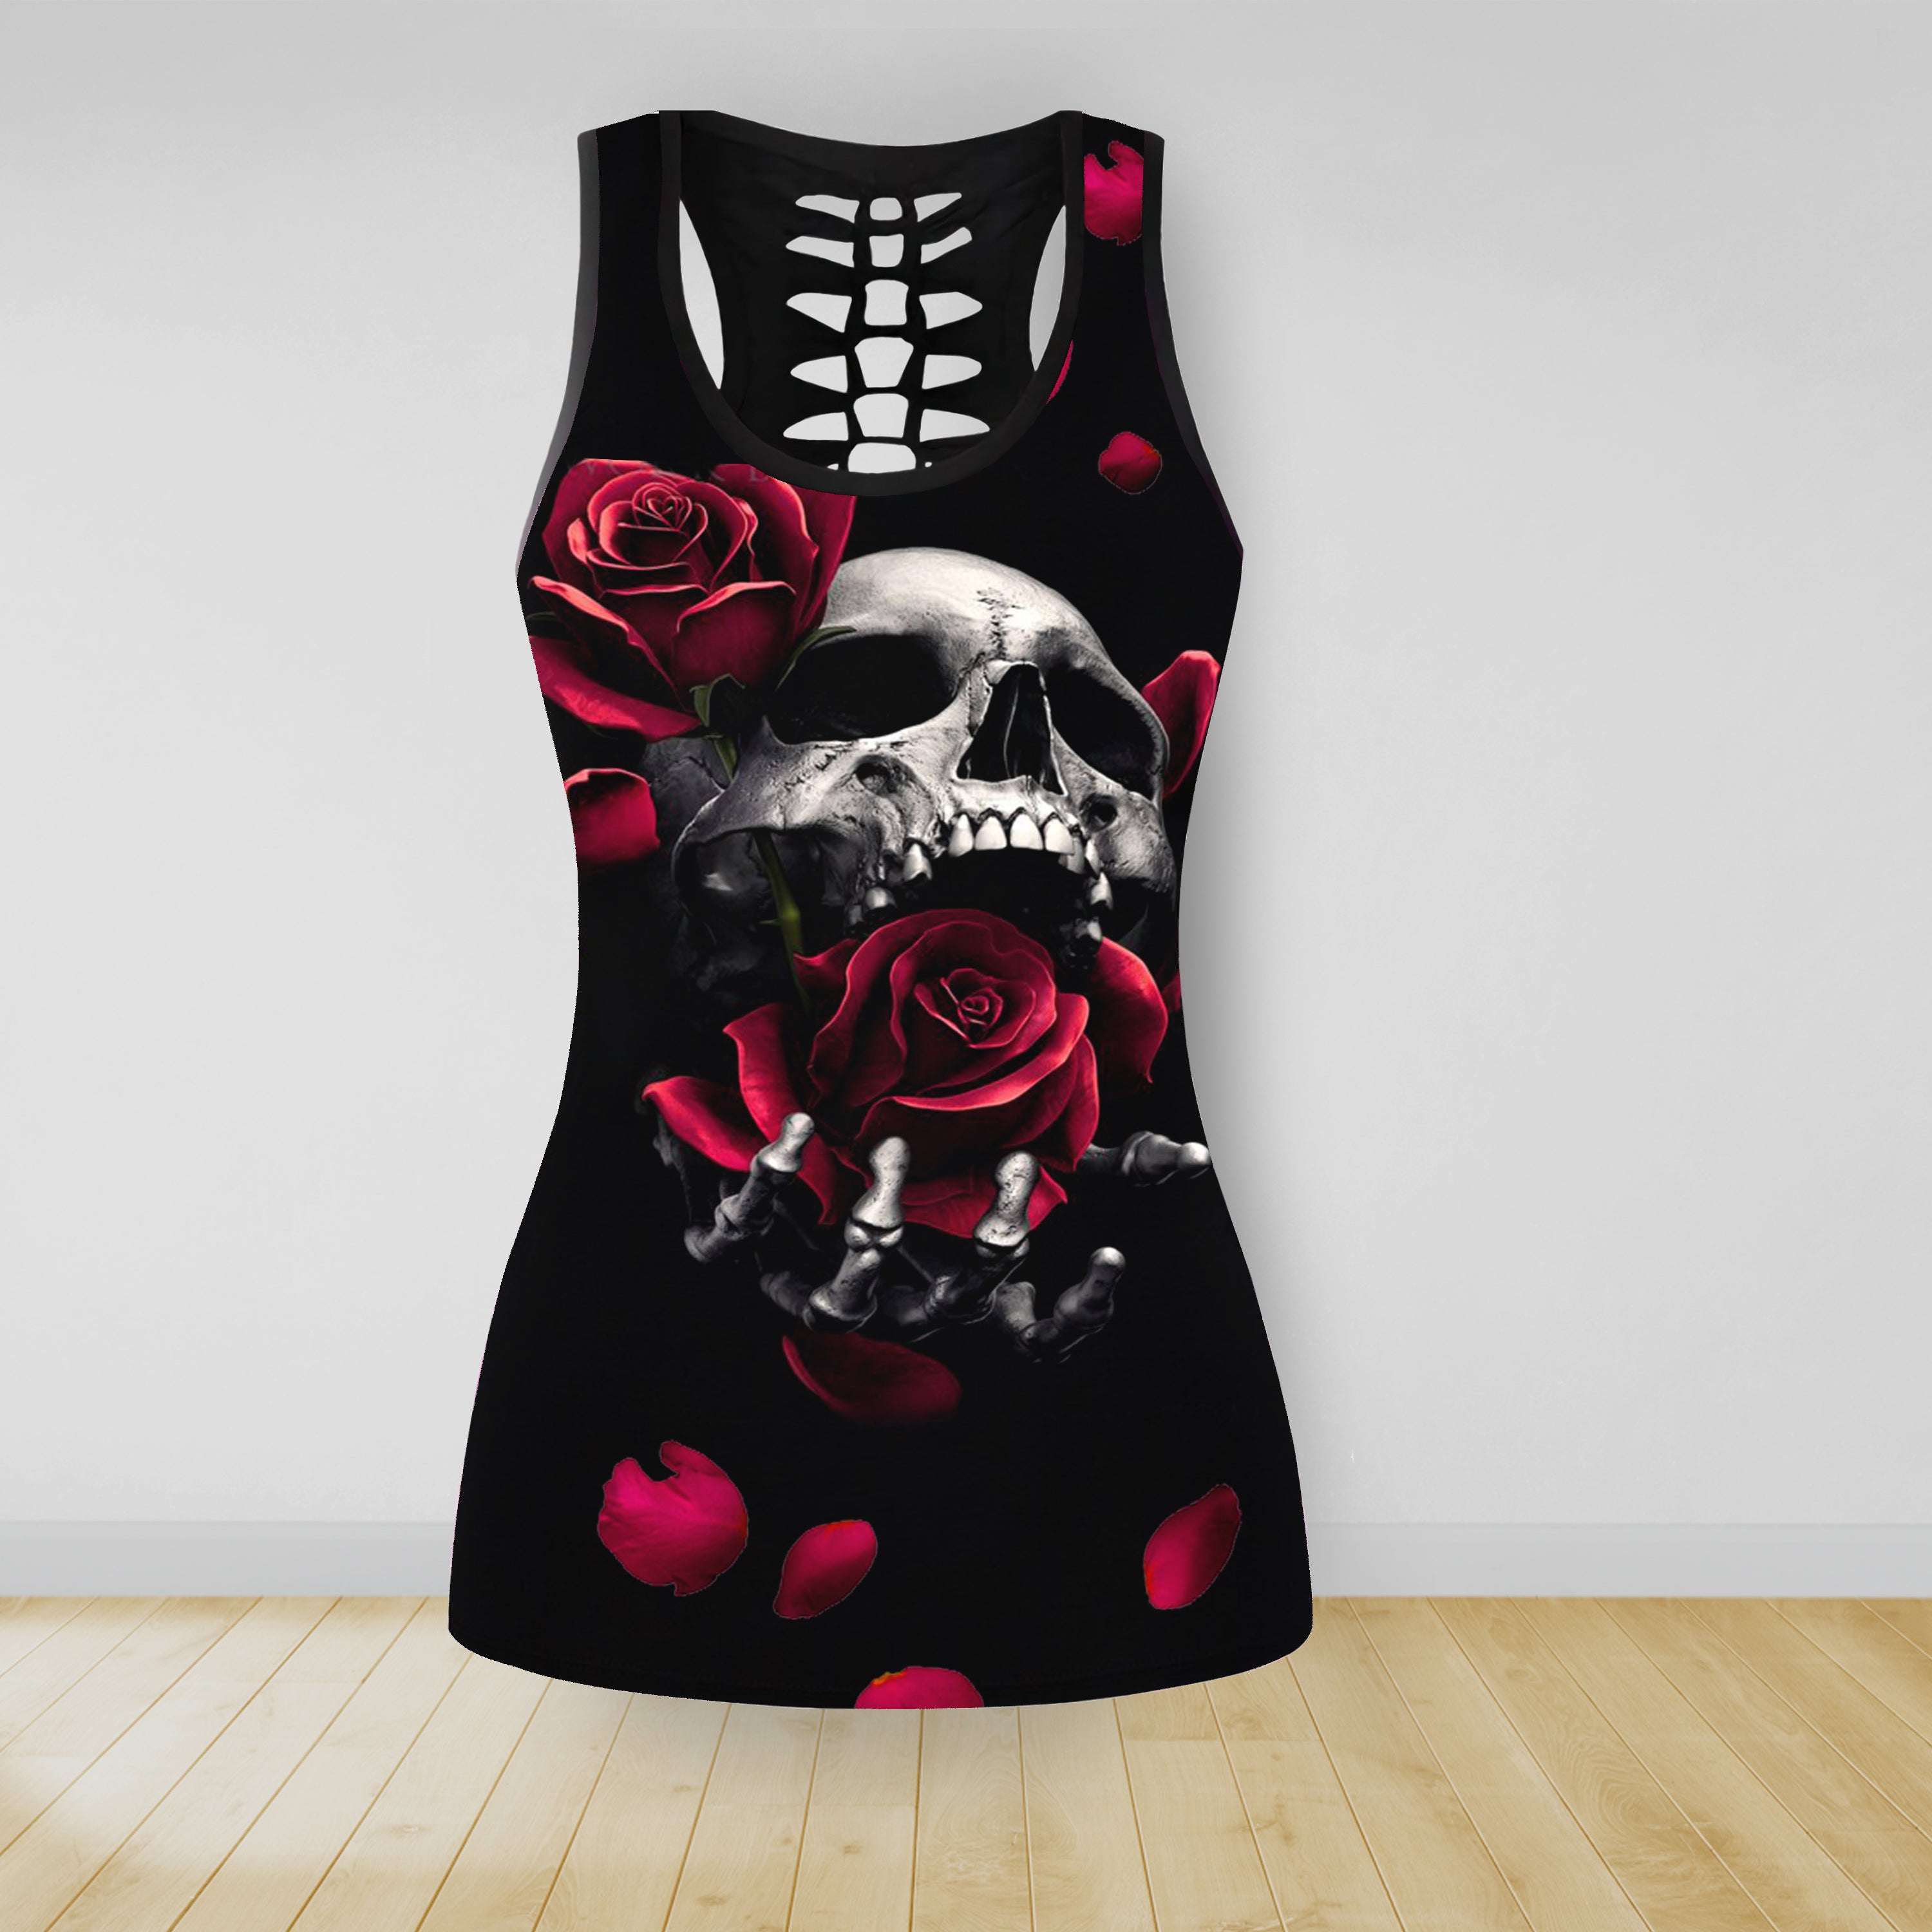 Skull With Roses Combo Legging Tank Top 08837